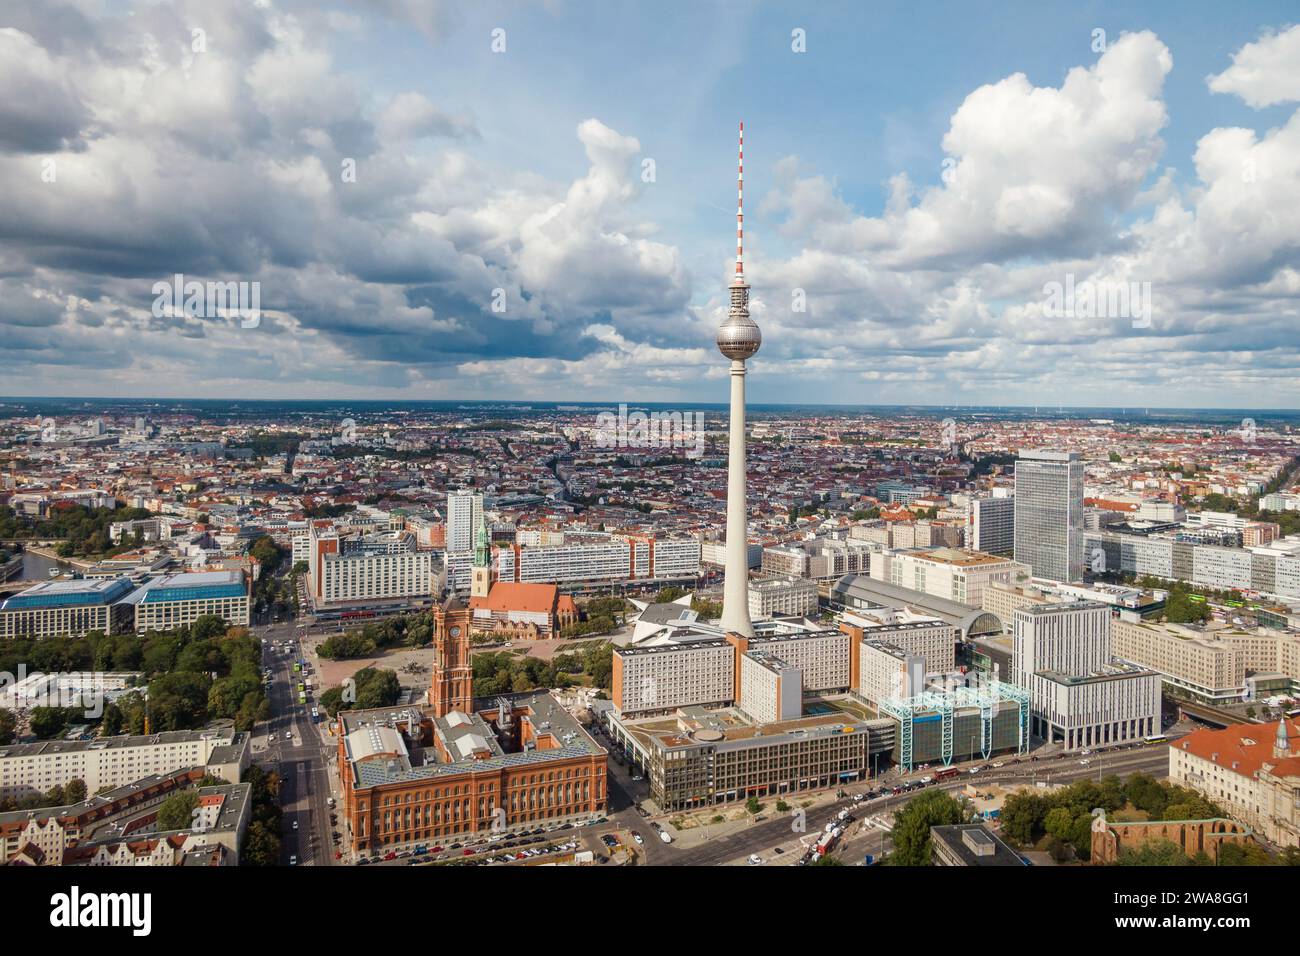 Aerial view of Berlin, Germany. Stock Photo